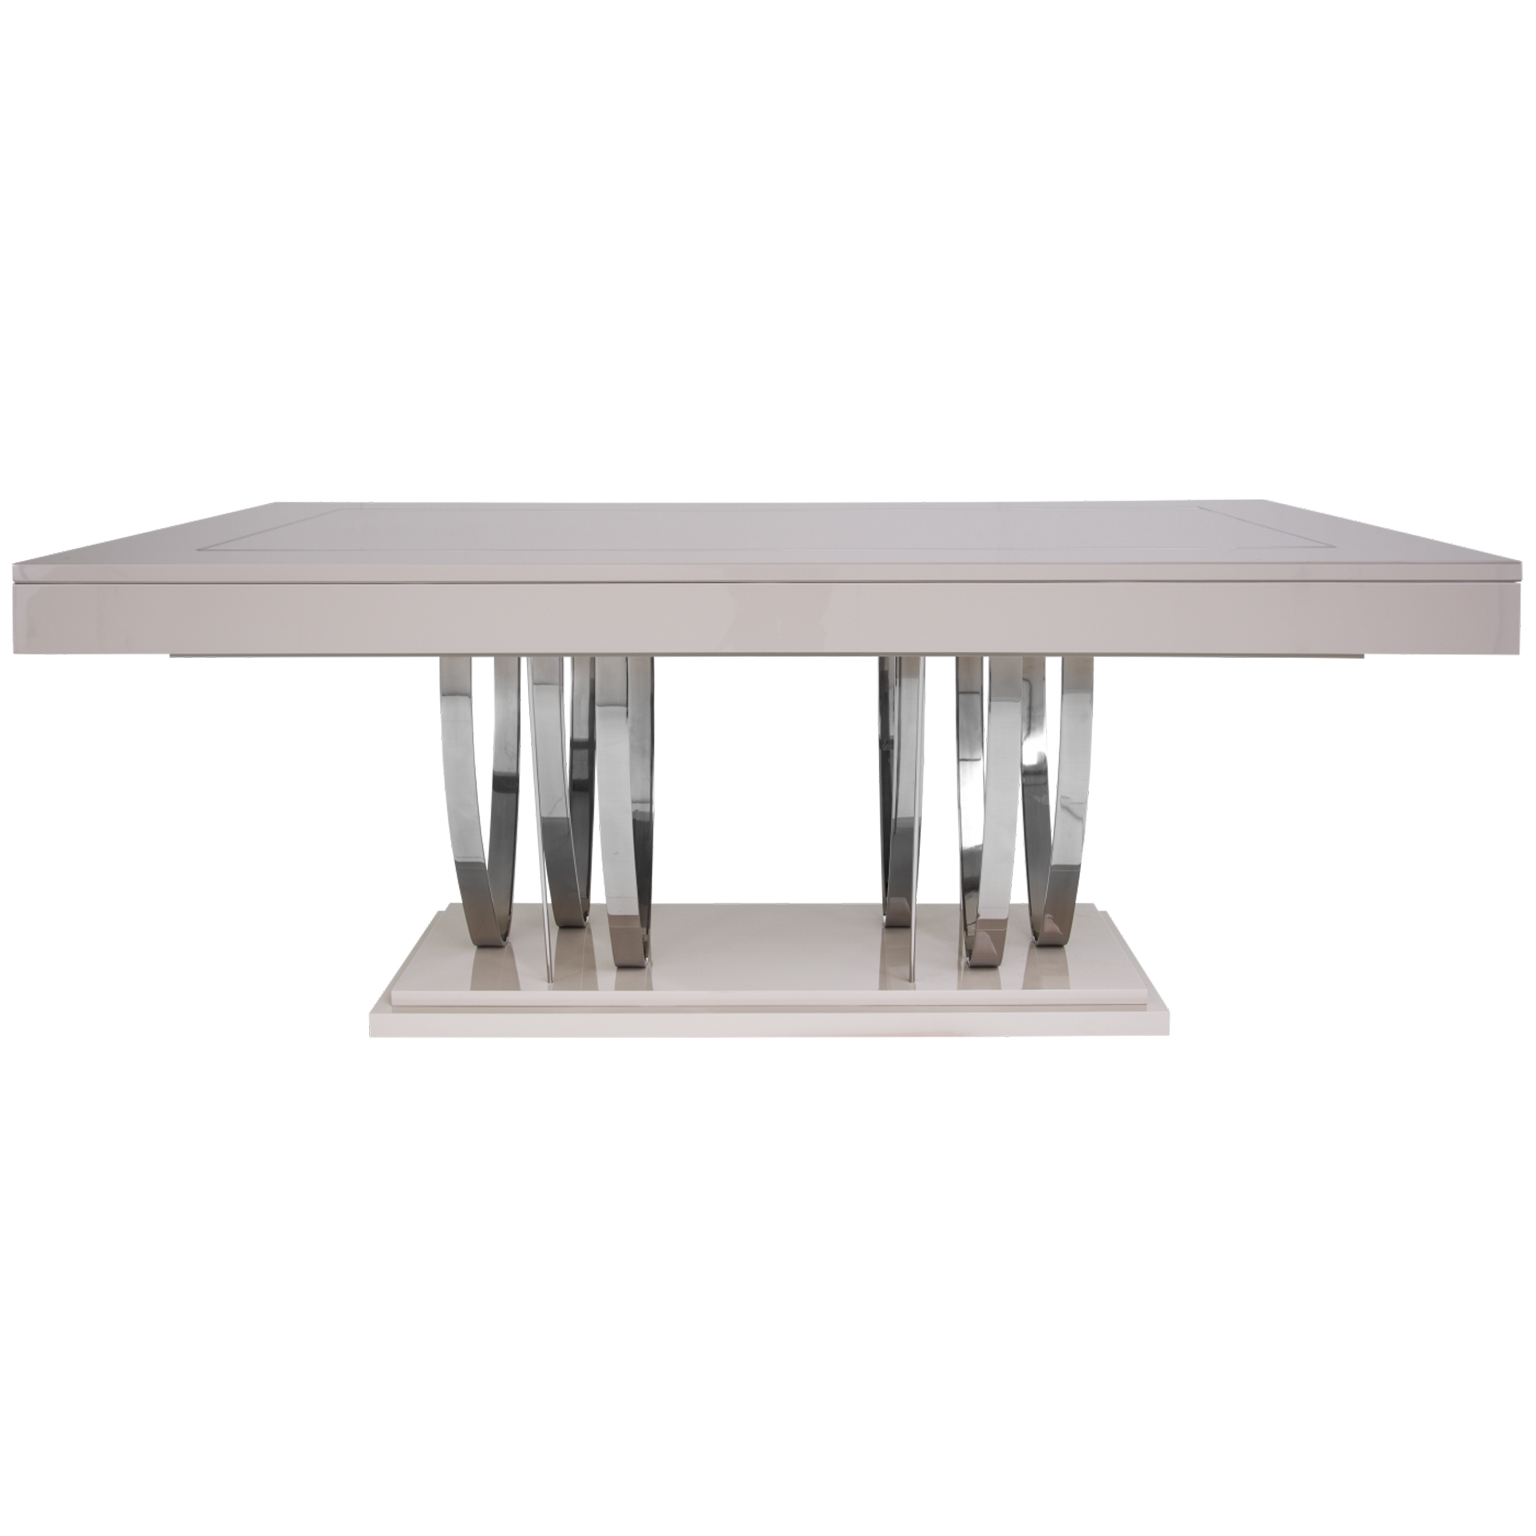 Dining Table in Cream Lacquer with polished stainless steel details and stand